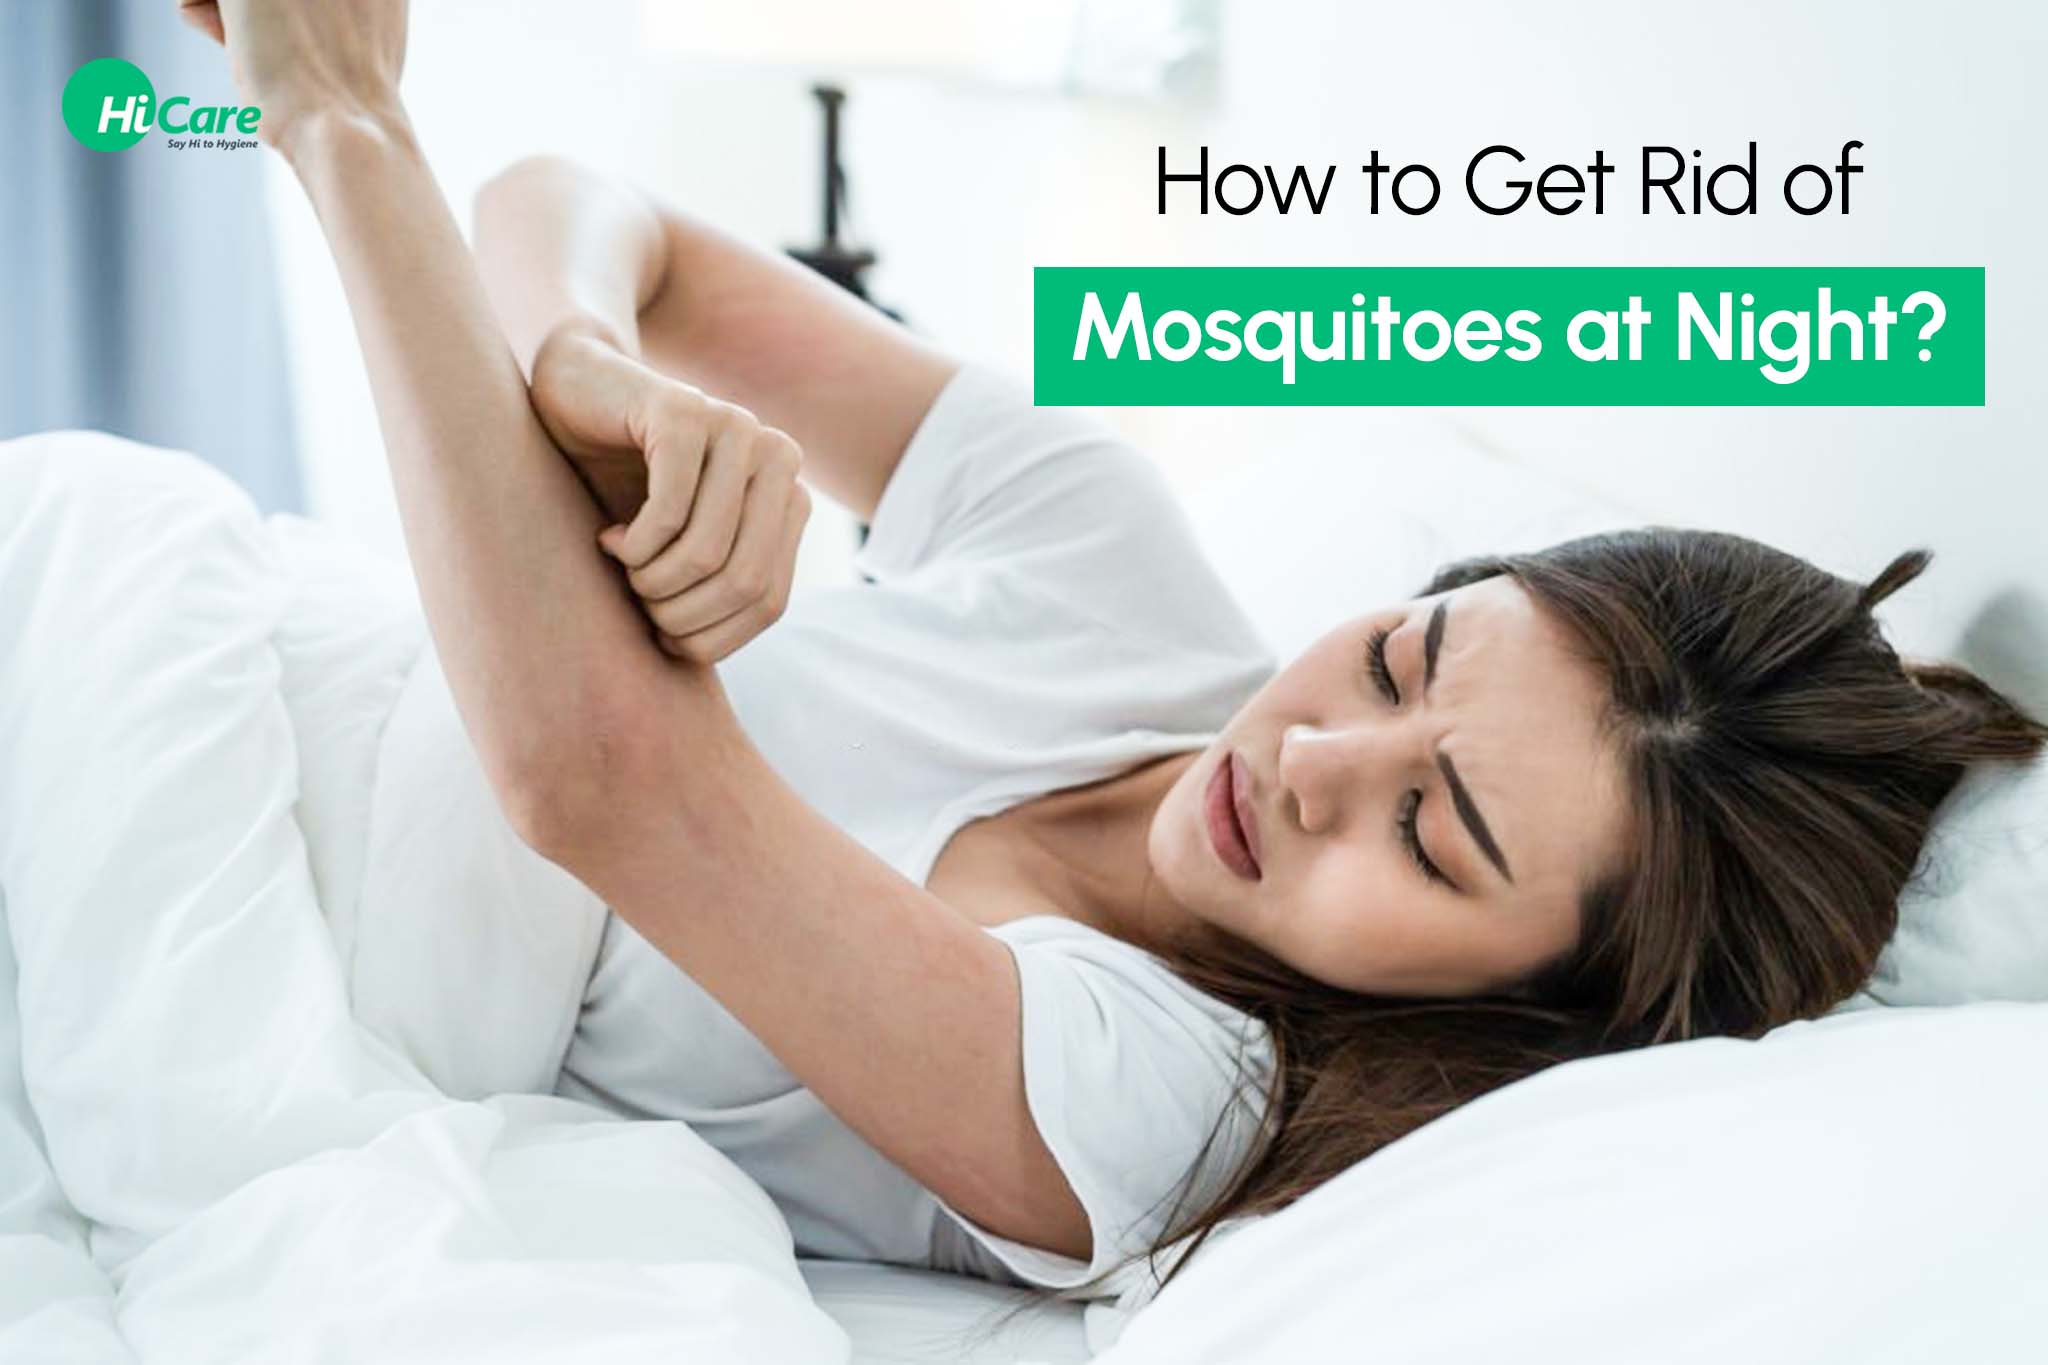 How to Get Rid of Mosquitoes at Night?